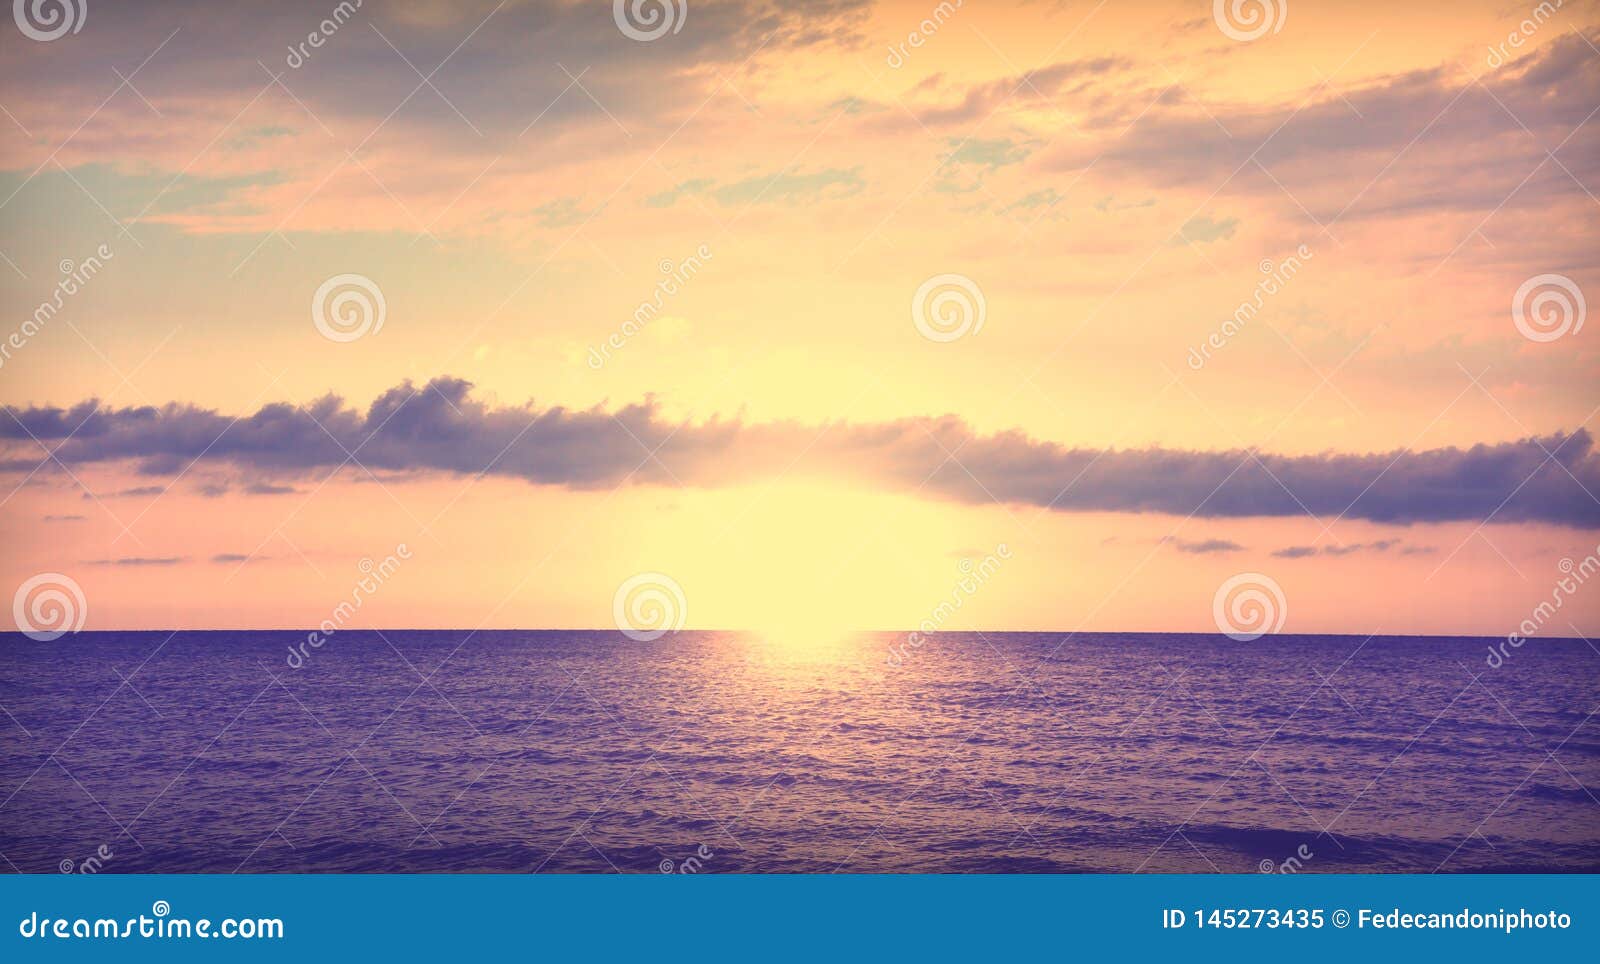 tranquillity scenes outdoor with sun and ocean